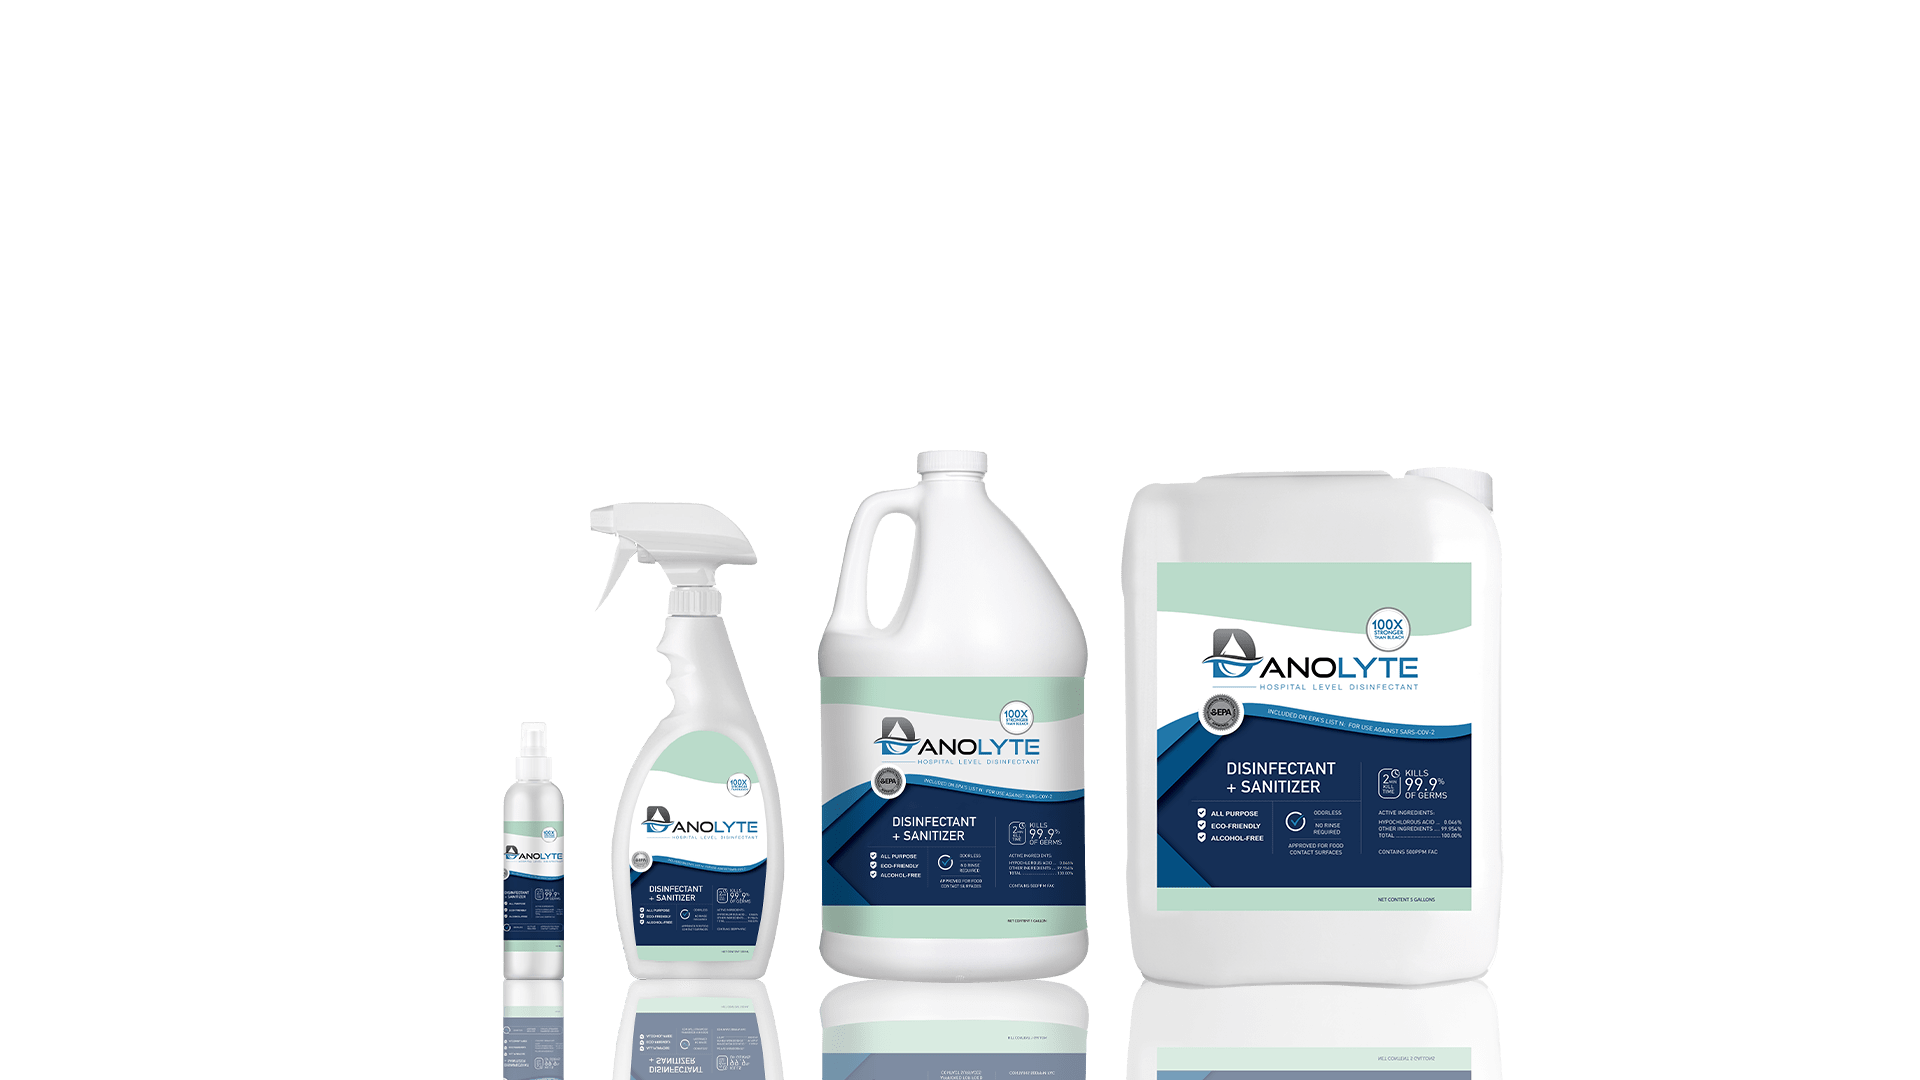 Anolyte disinfectant solution